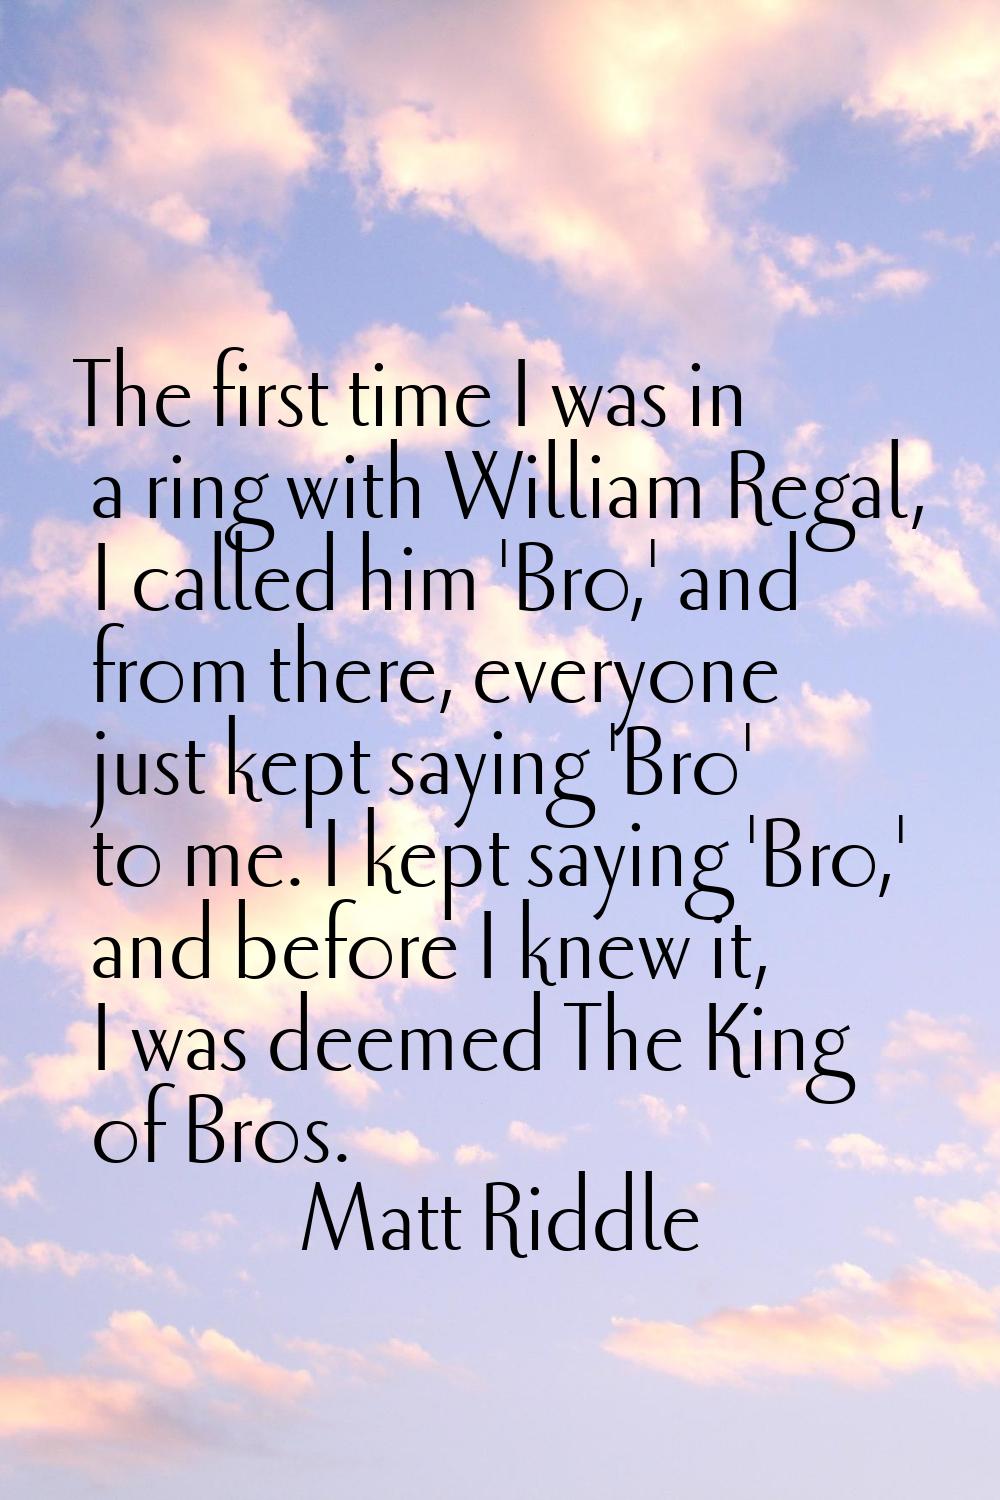 The first time I was in a ring with William Regal, I called him 'Bro,' and from there, everyone jus